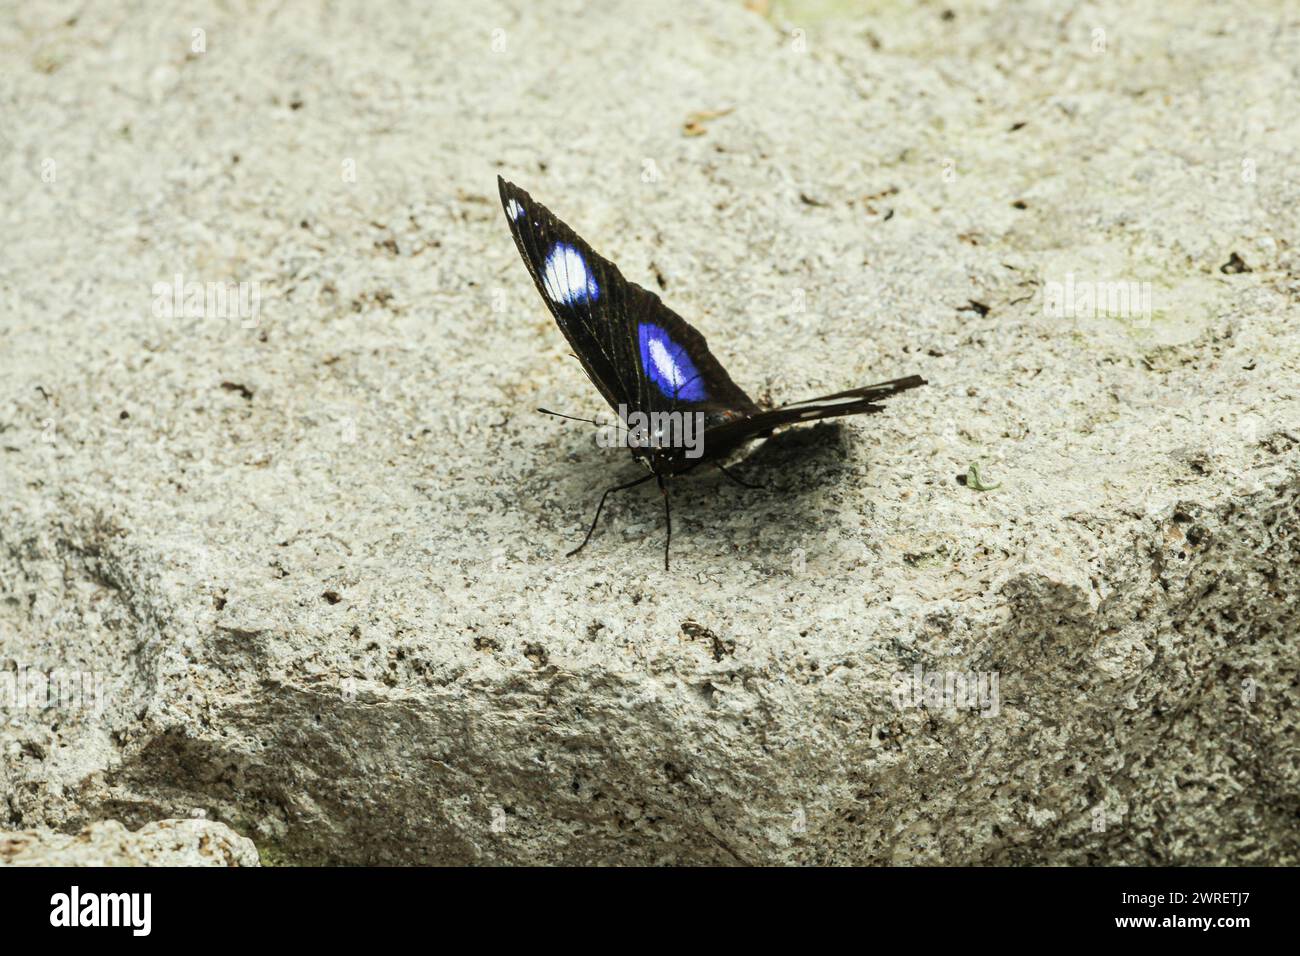 A very beautiful and attractive butterfly posed on a stone heated by the sun, an active butterfly named Hypolimnas bolina butterfly. Stock Photo